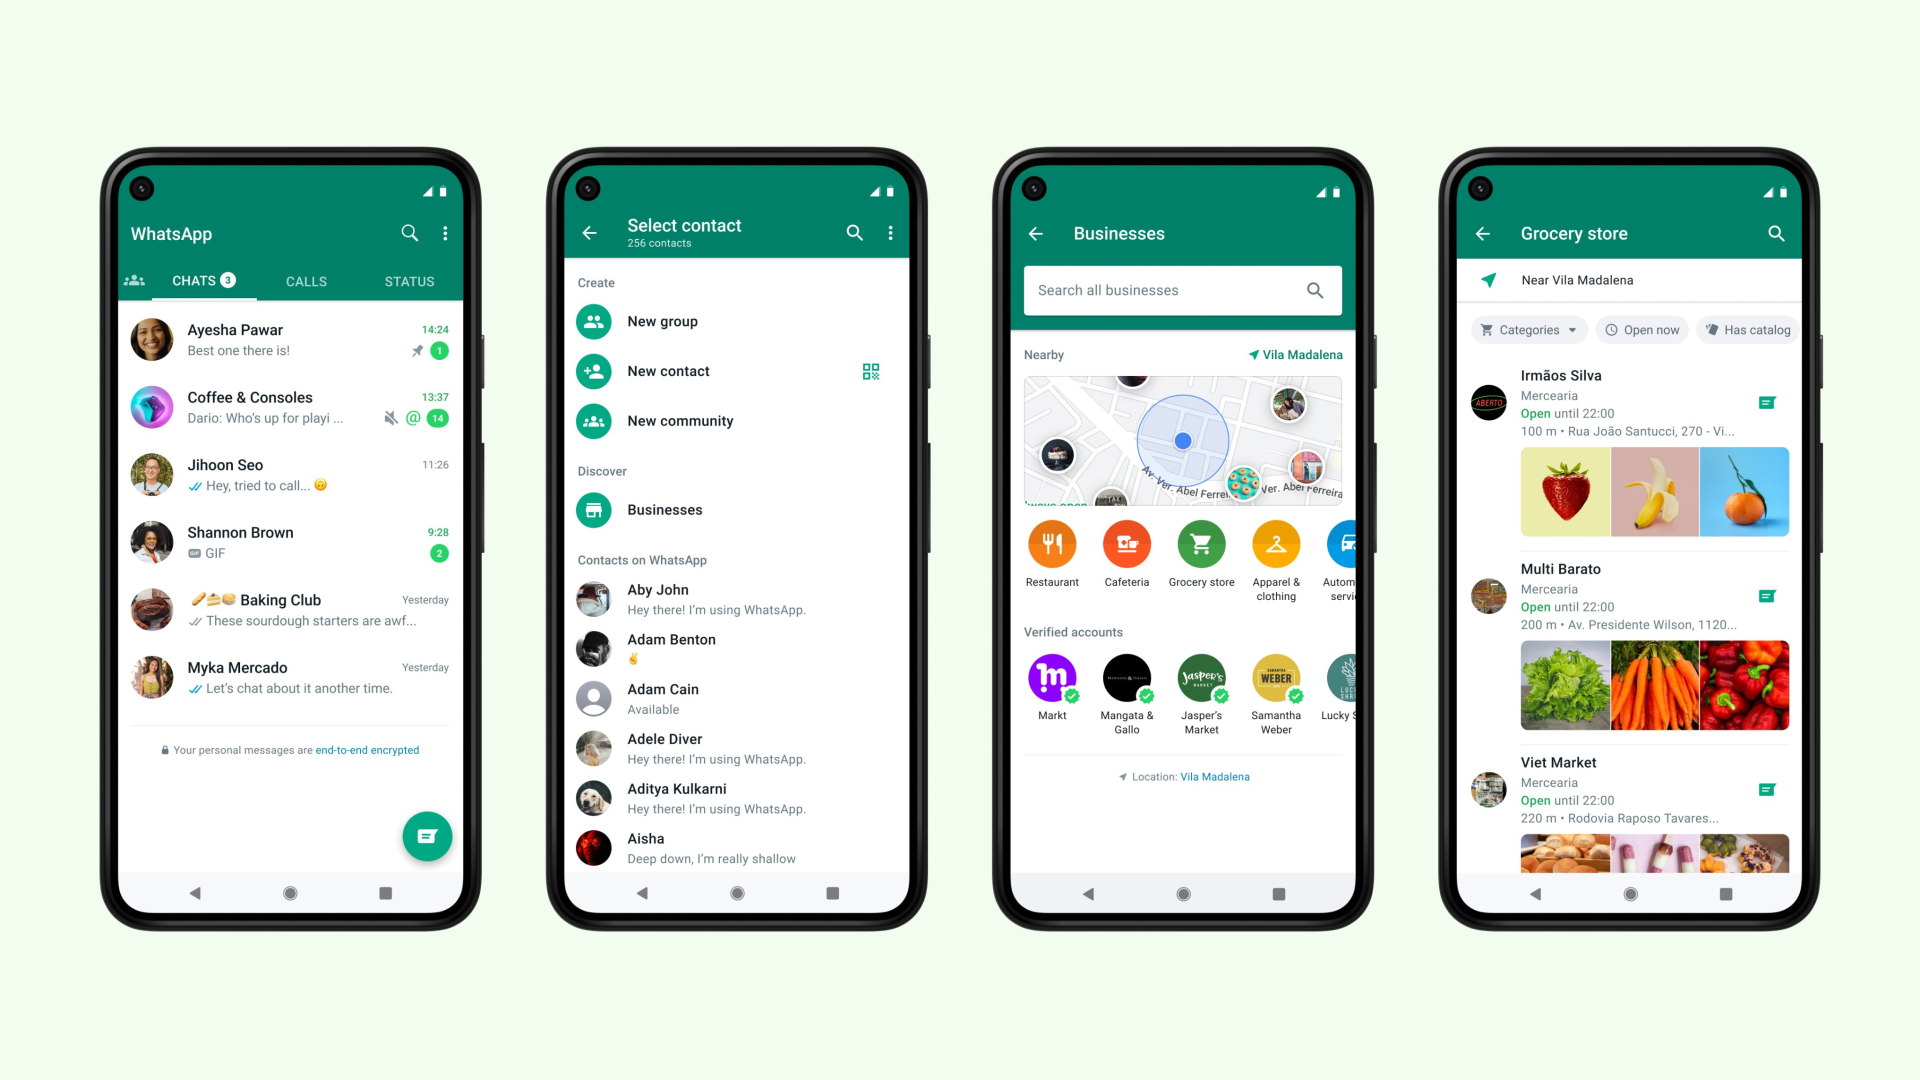 Mock-ups showing Brazilian nearby feature for business directory on WhatsApp